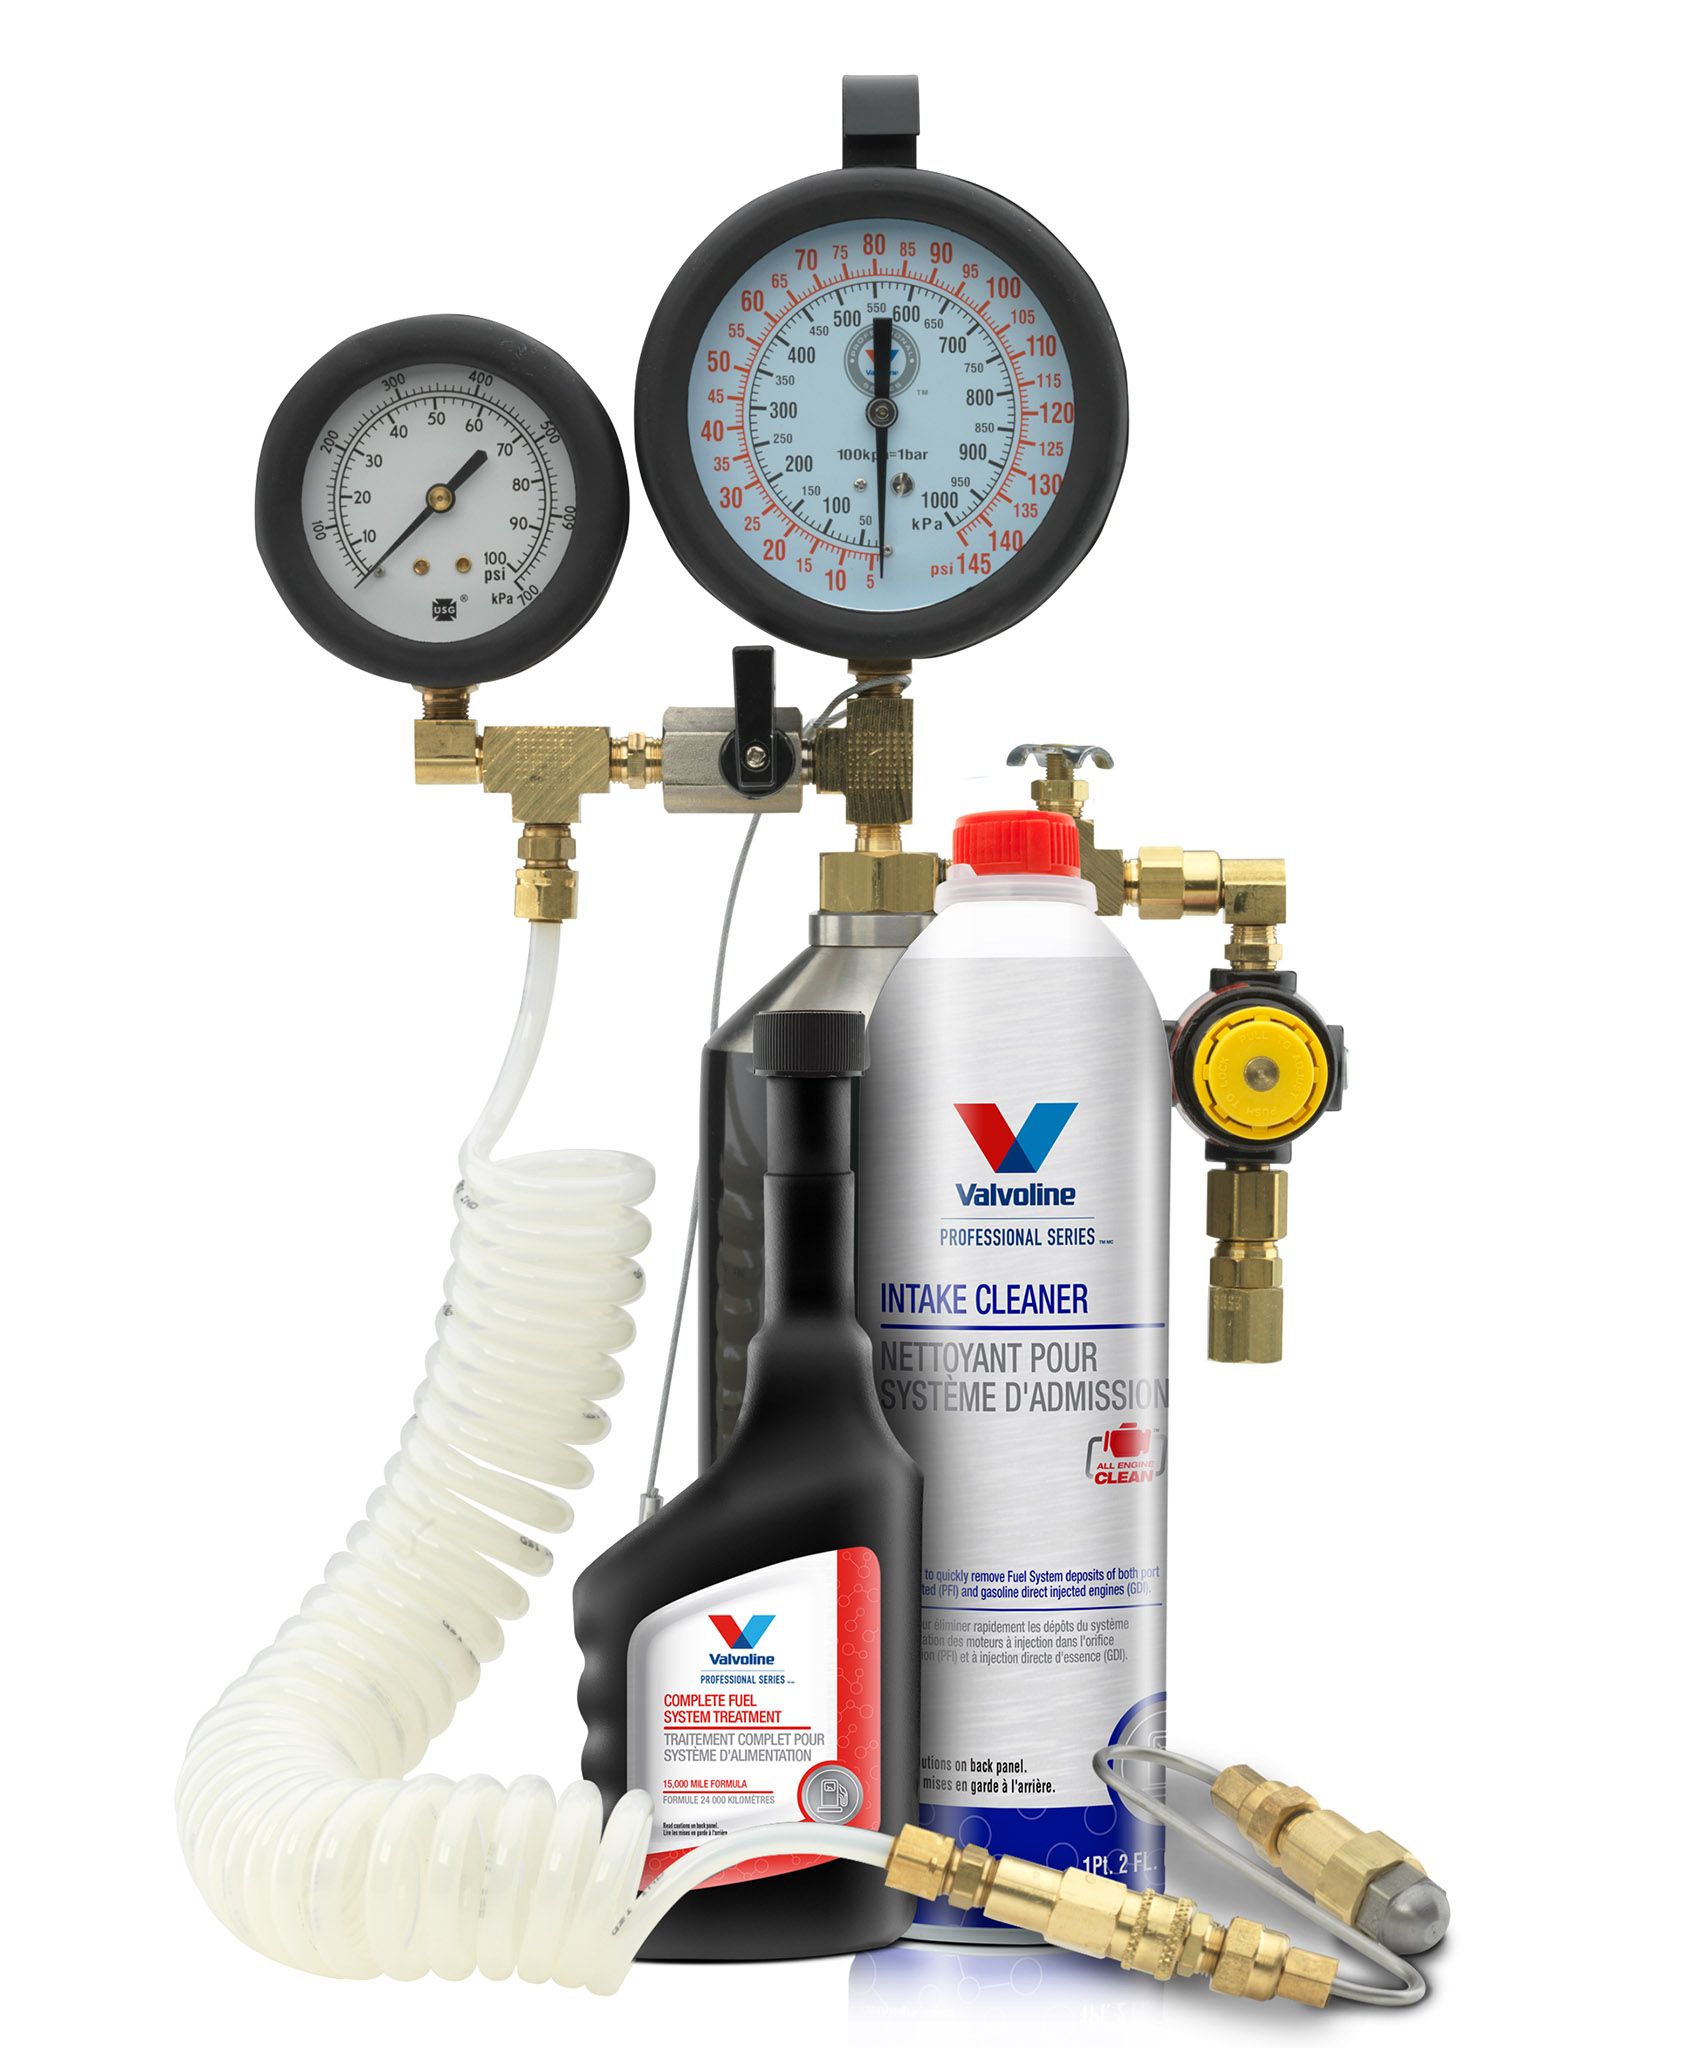 Valvoline recently introduced Valvoline All Engine Clean Intake Cleaner and Valvoline All Engine Clean Fuel Rail Cleaner.